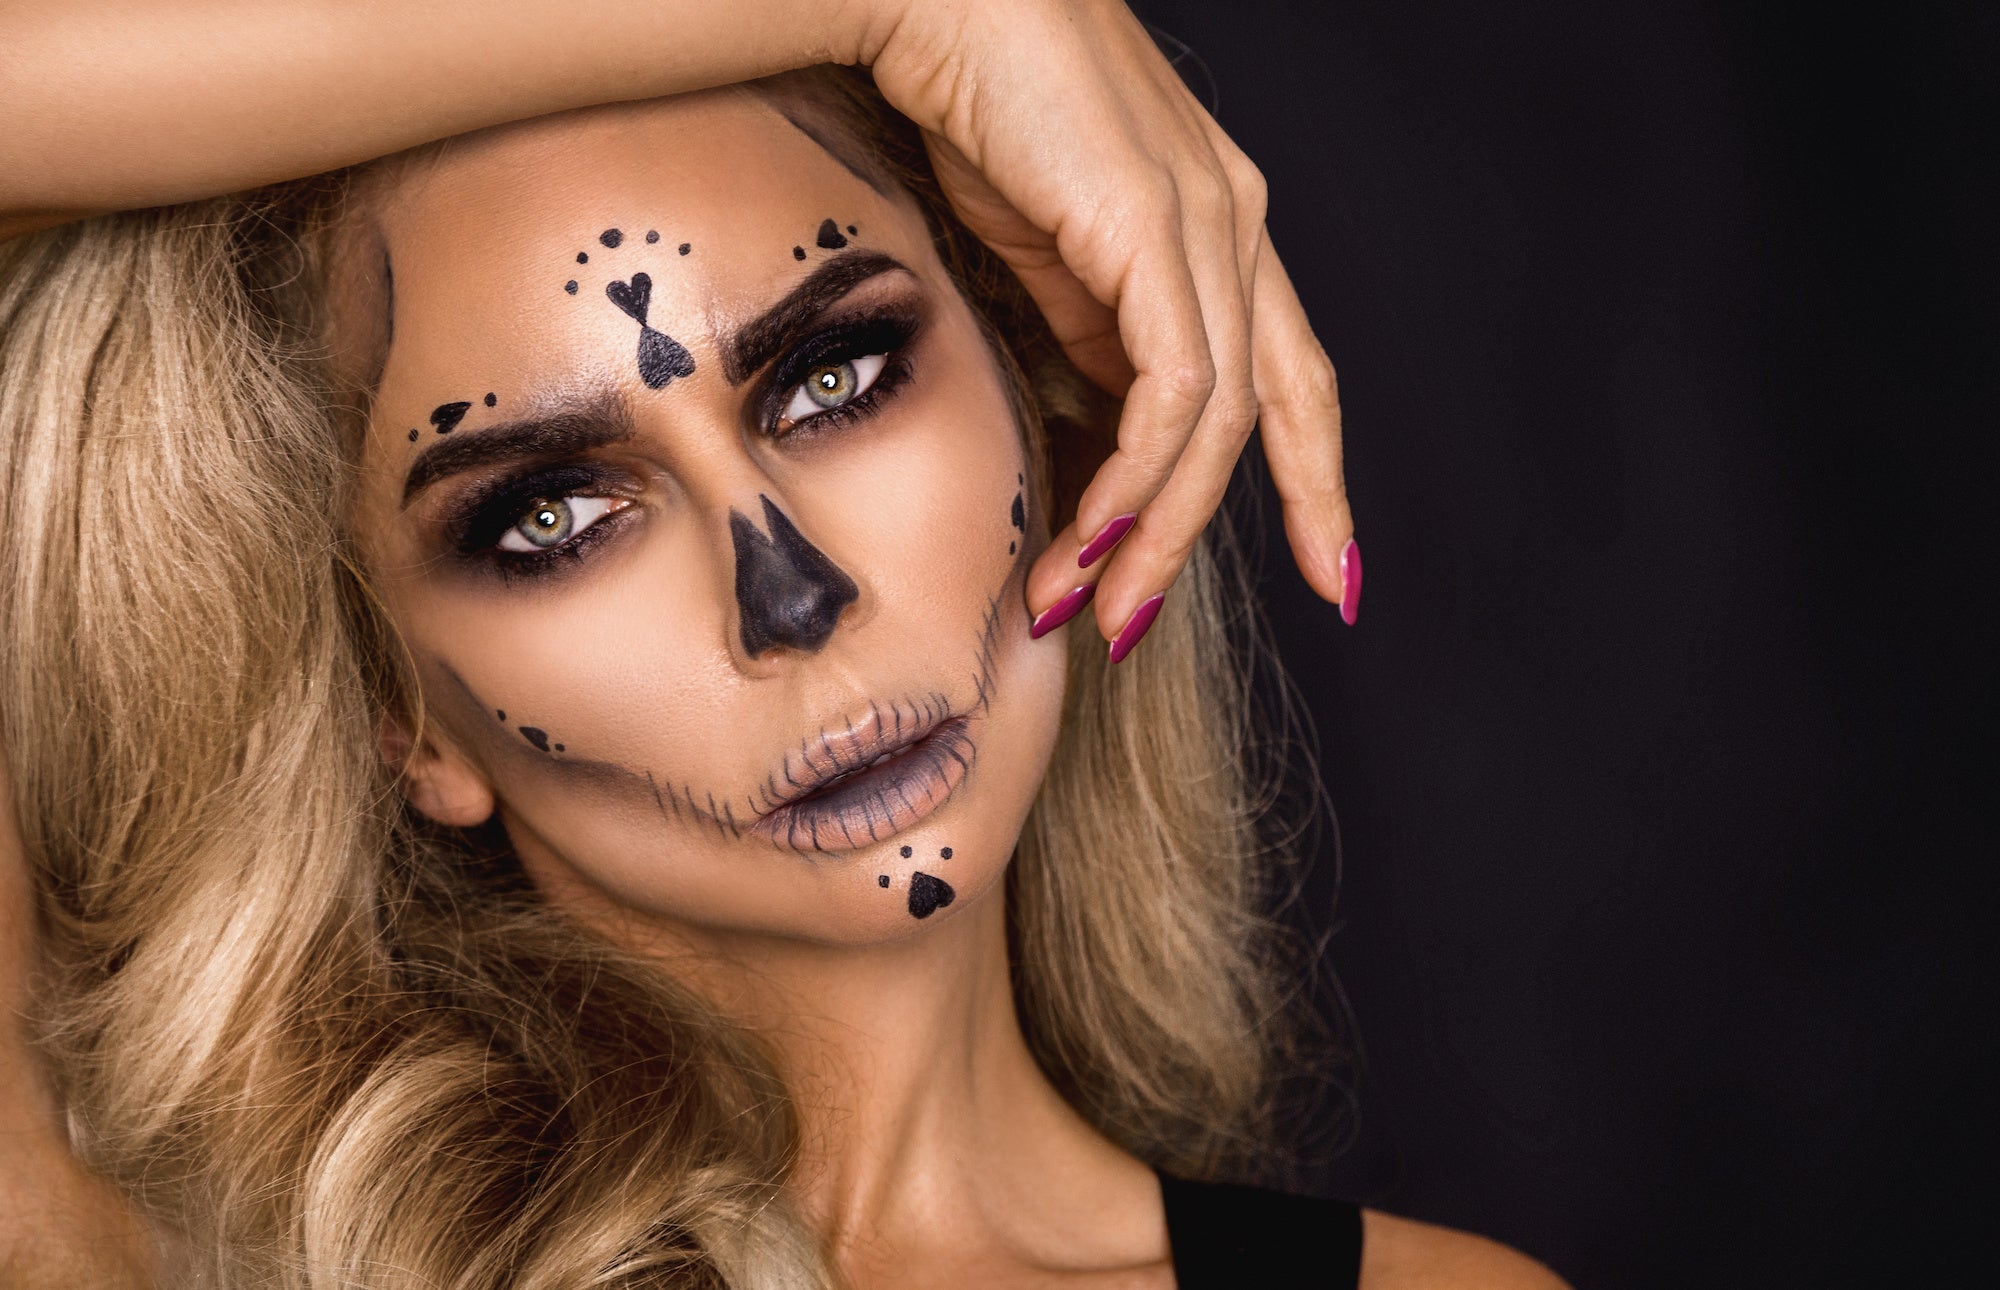 5 Makeup Tips To Save Your Complexion This Halloween